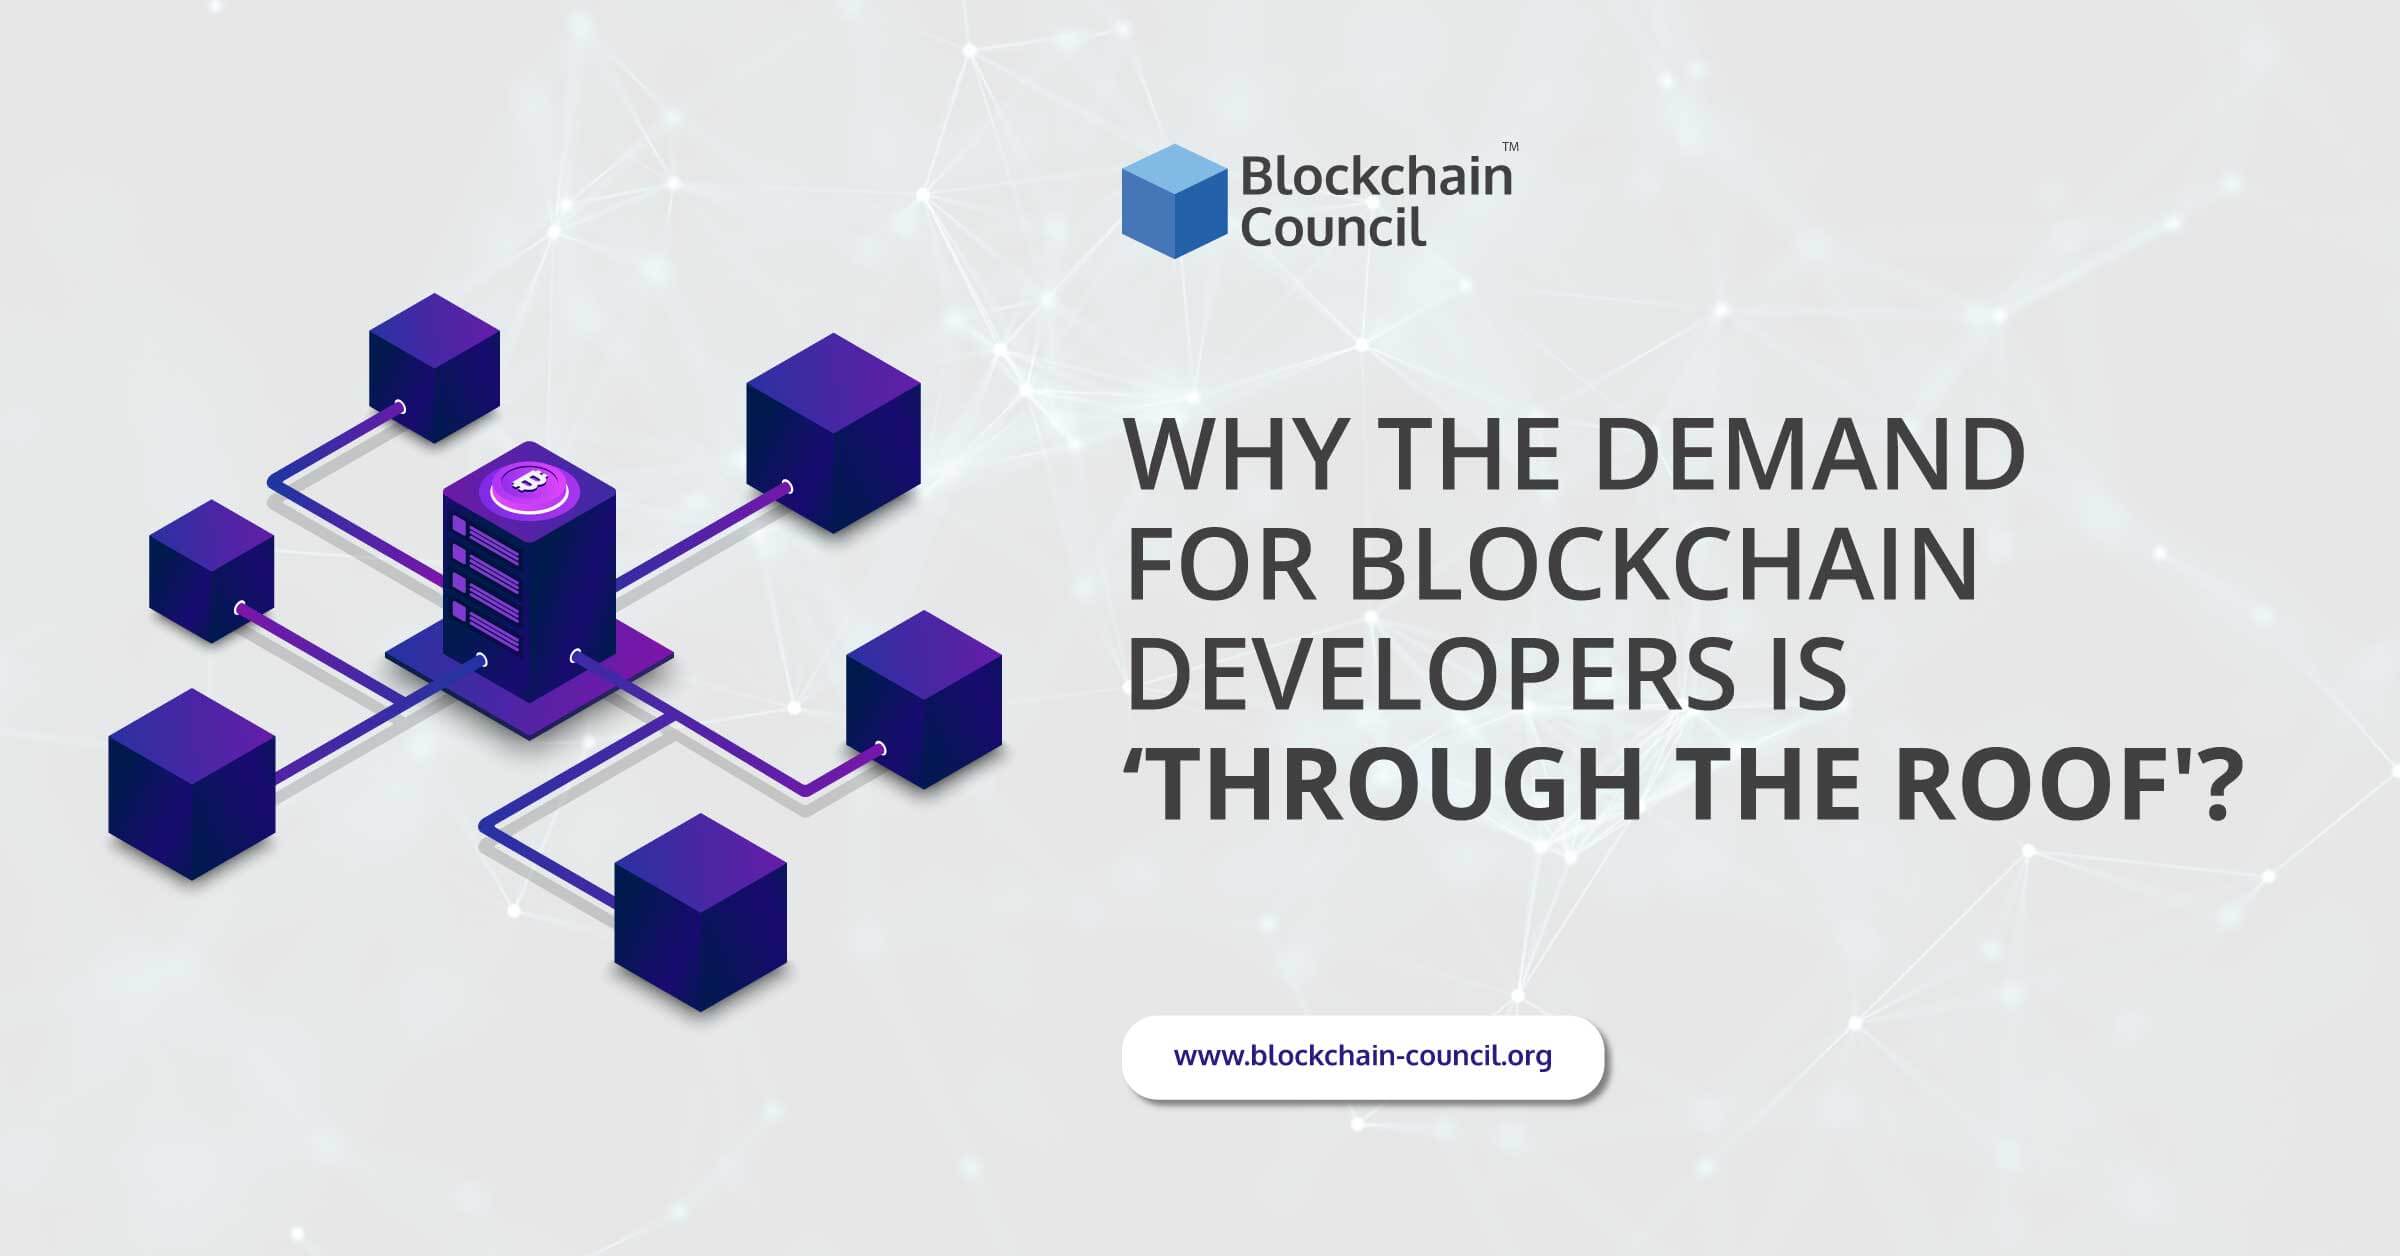 Why the Demand for Blockchain Developers is ‘through the roof’?